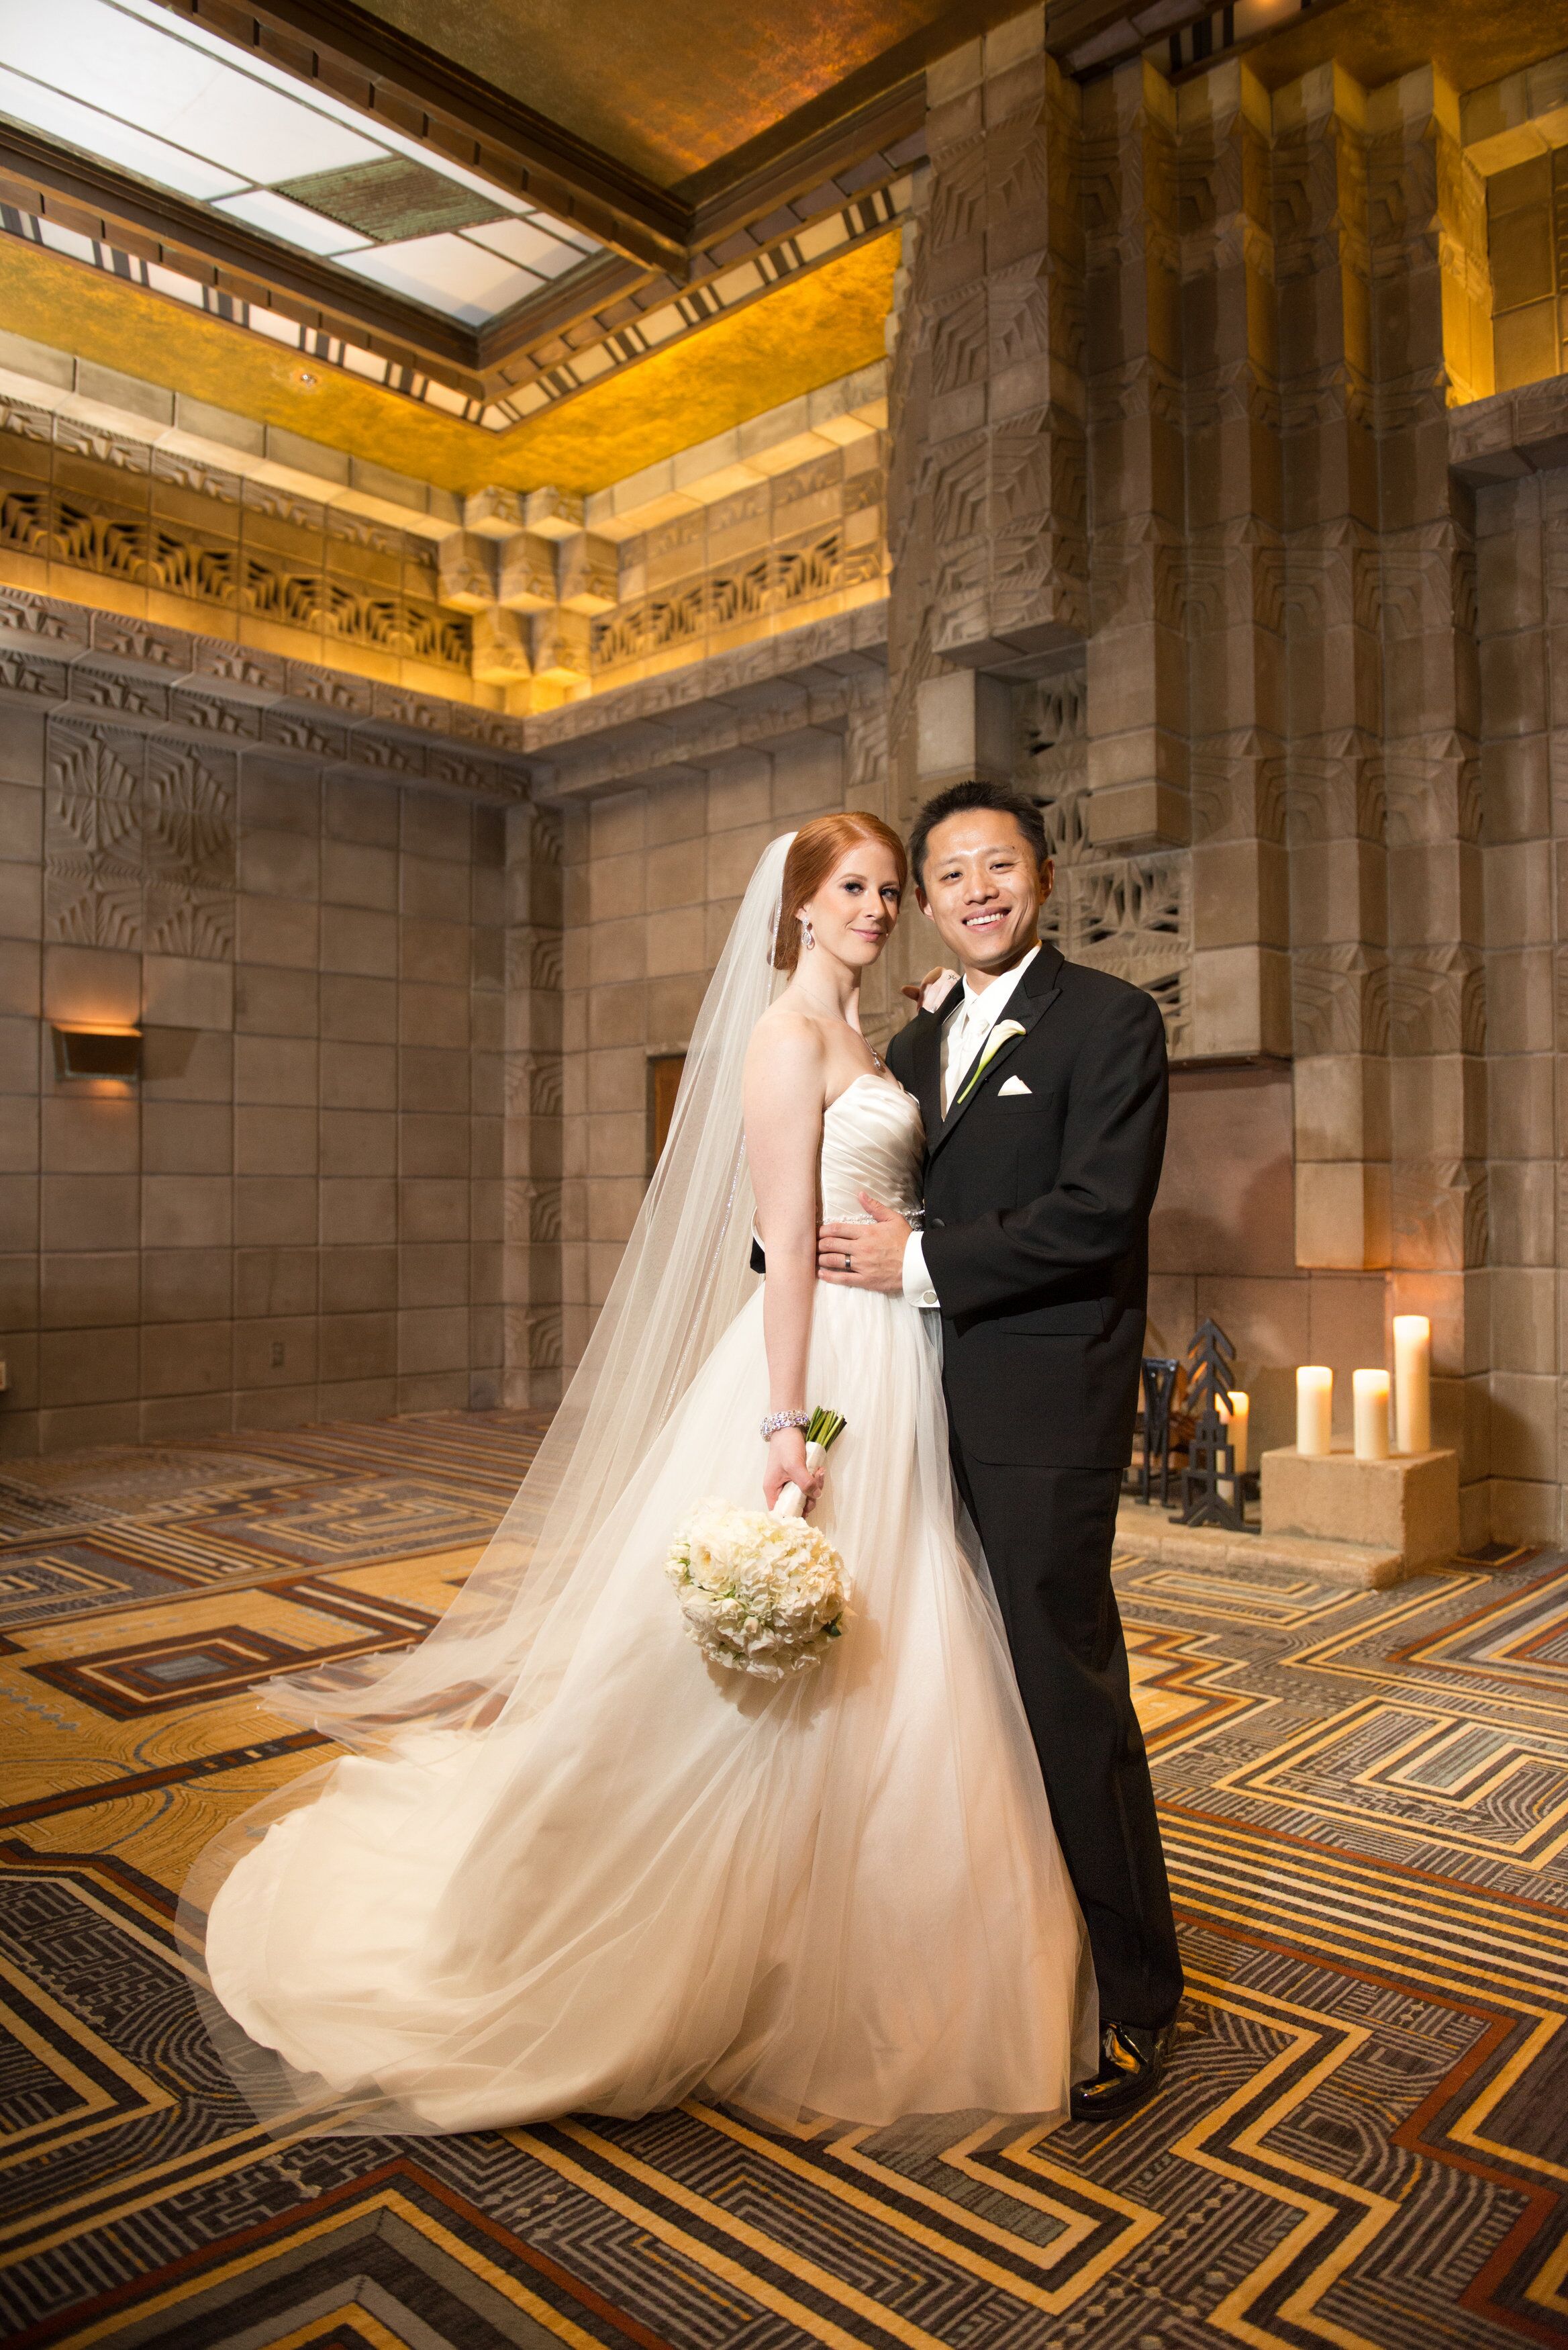 Arizona Biltmore Hotel - An Art Deco and Traditional Chinese Wedding at the Arizona ... - The couple tied the knot at the Arizona Biltmore Hotel, a striking building built in   the 1920s with art deco-styled architecture advised by Frank Lloyd Wright thatÂ ...